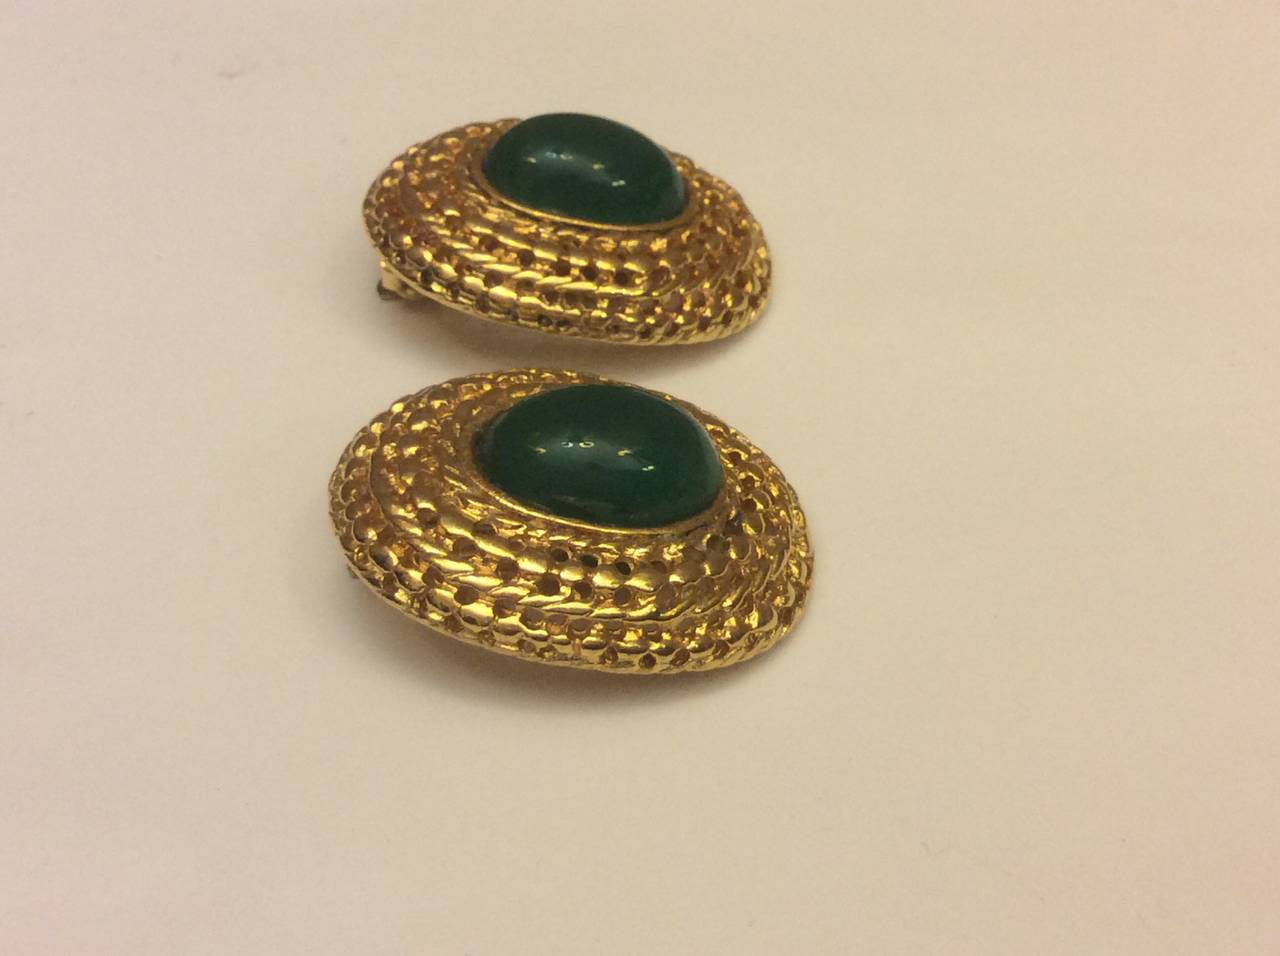 Vintage Les Bernard gold tone clip on earrings with faux emerald cabochon. 
Measure 1.5